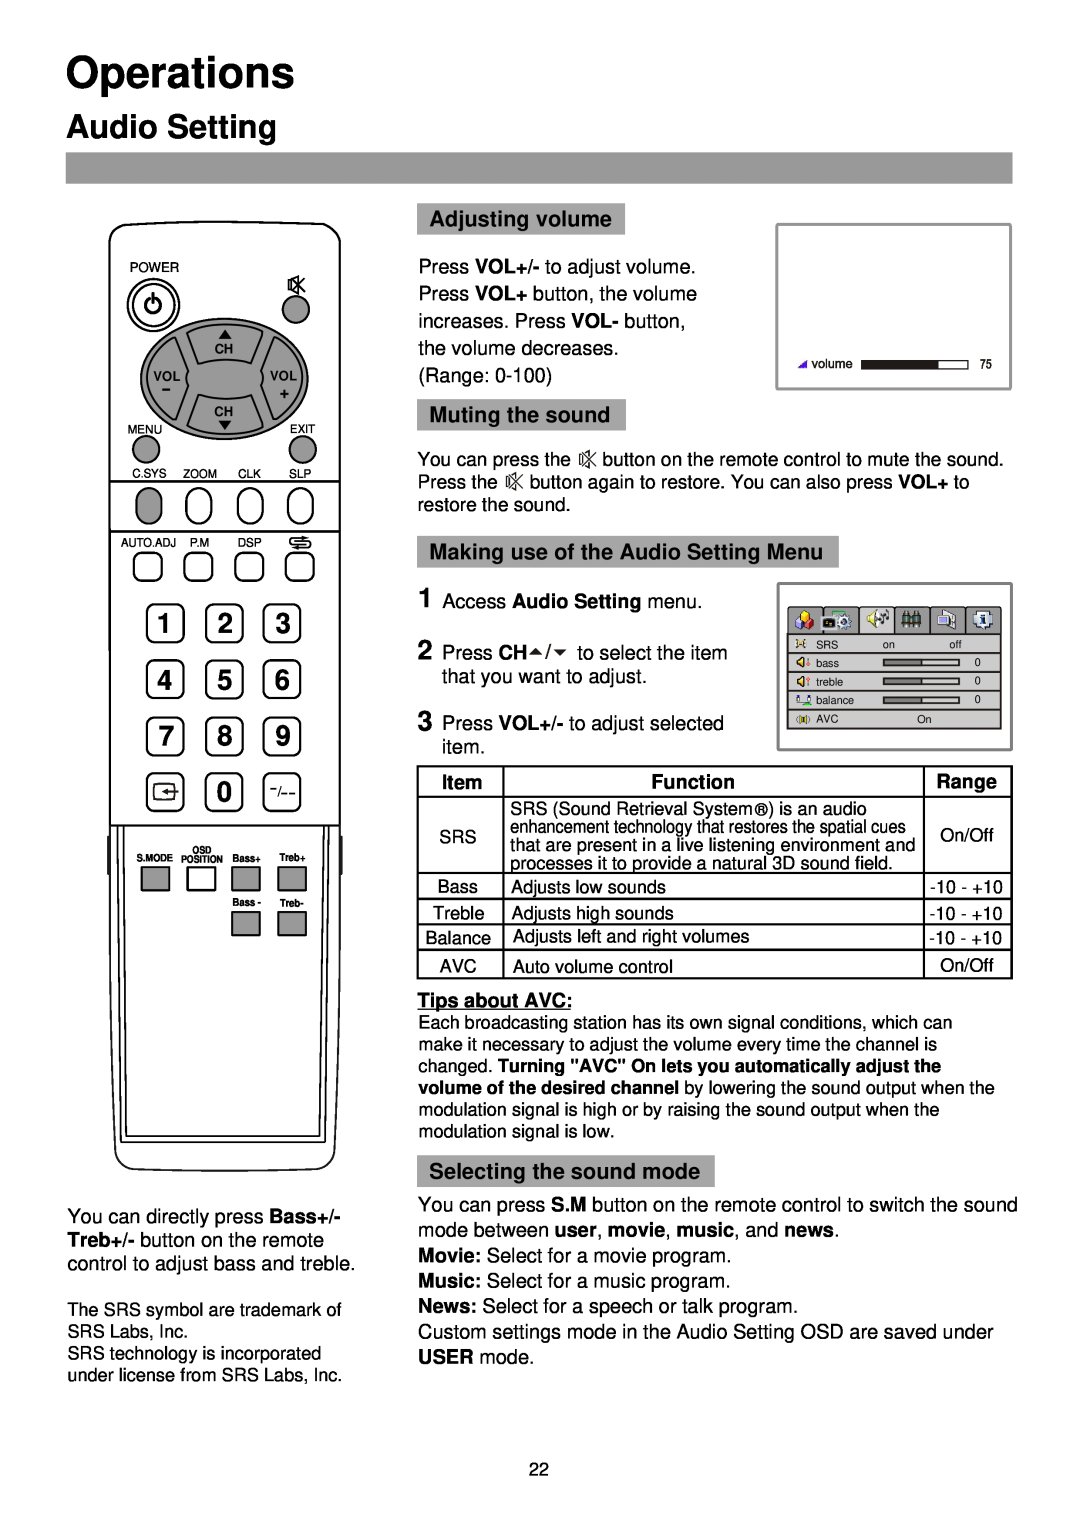 Palsonic TFTV515 Audio Setting, Operations, 1 2 4 5 7 8, Adjusting volume, Muting the sound, Selecting the sound mode 